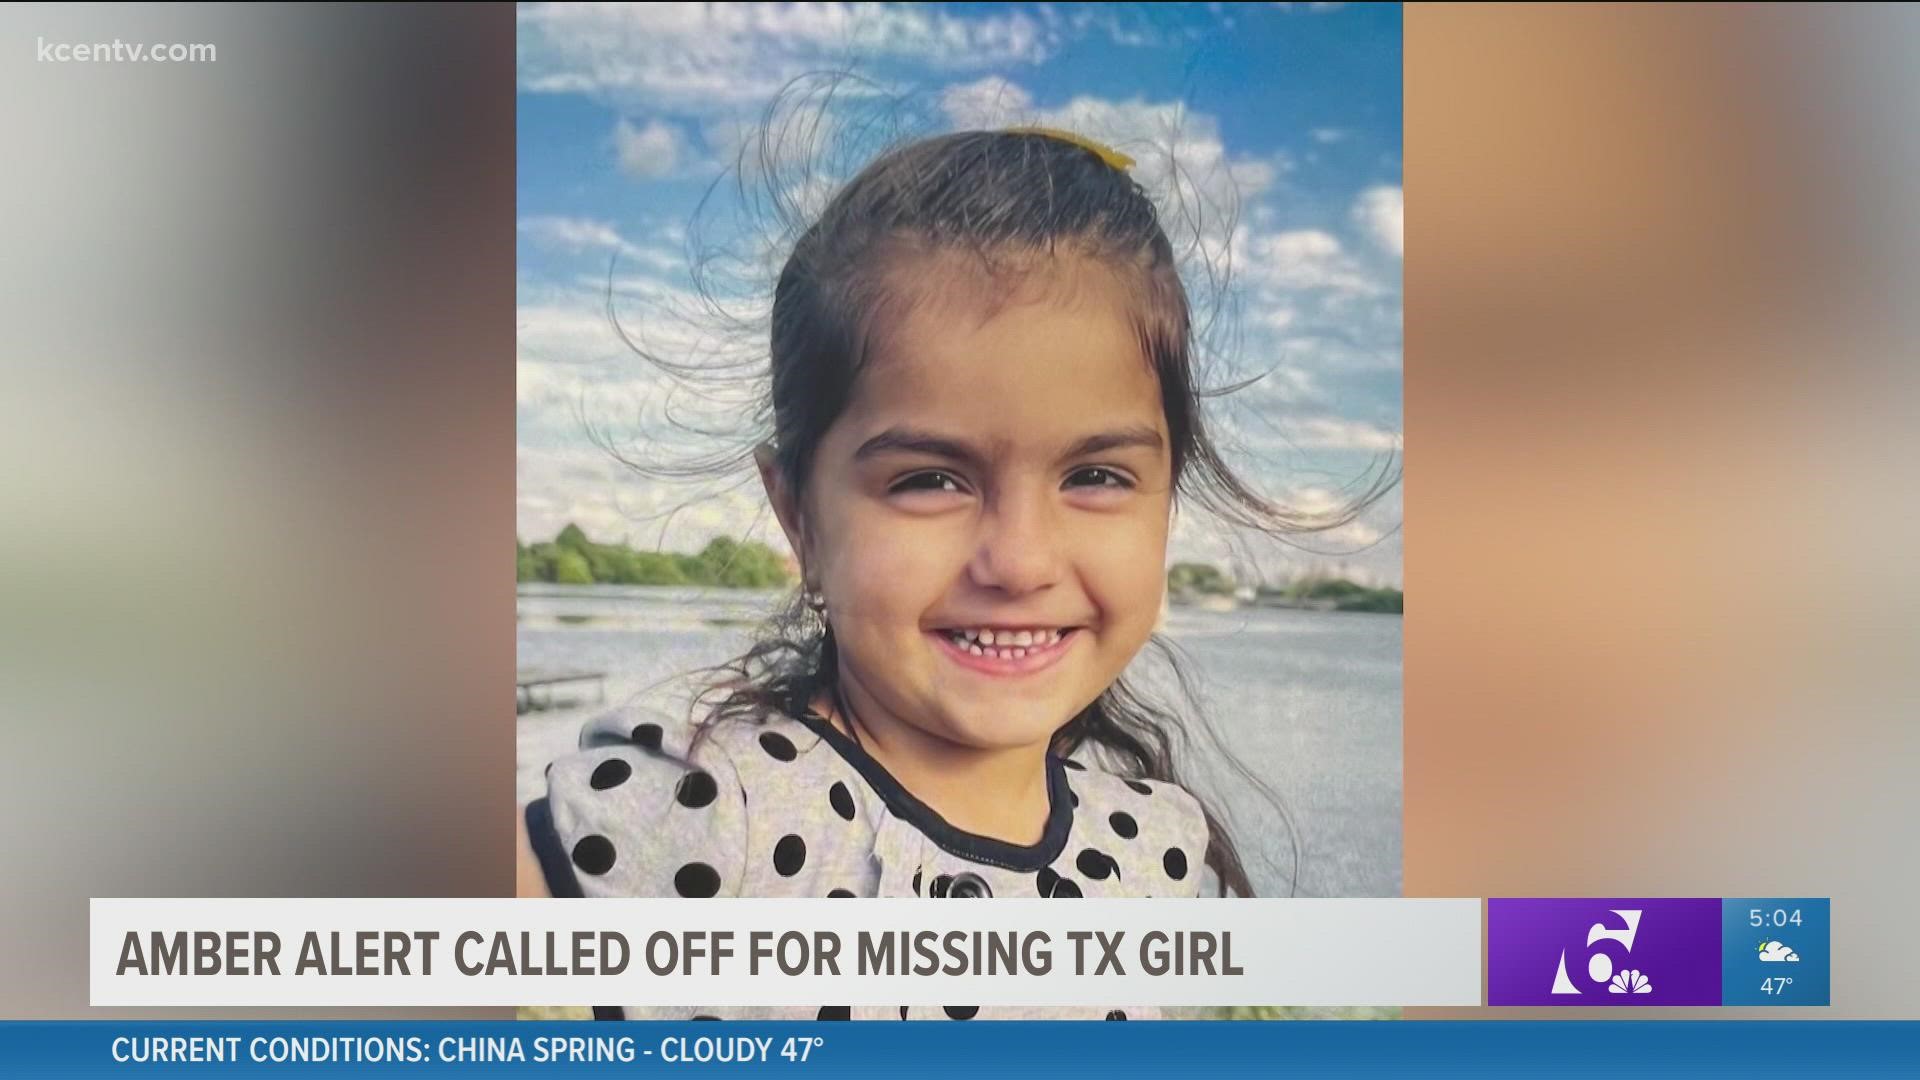 Amber alerts have been discontinued for three-year-old Lina Kahil who has been missing since Dec. 20.